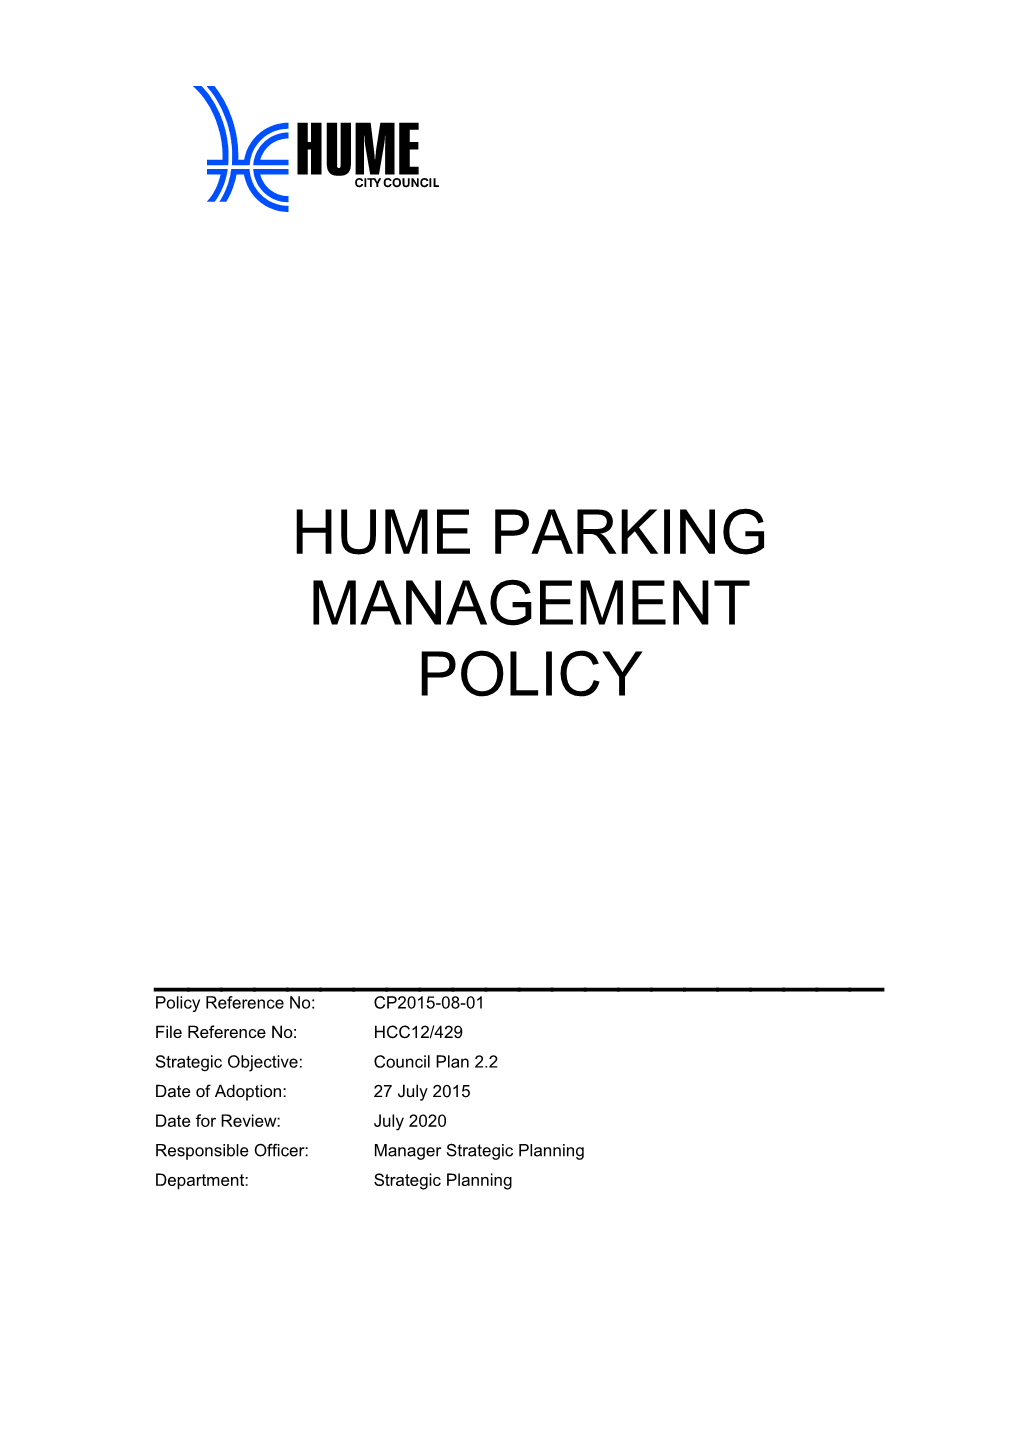 Hume Parking Management Policy